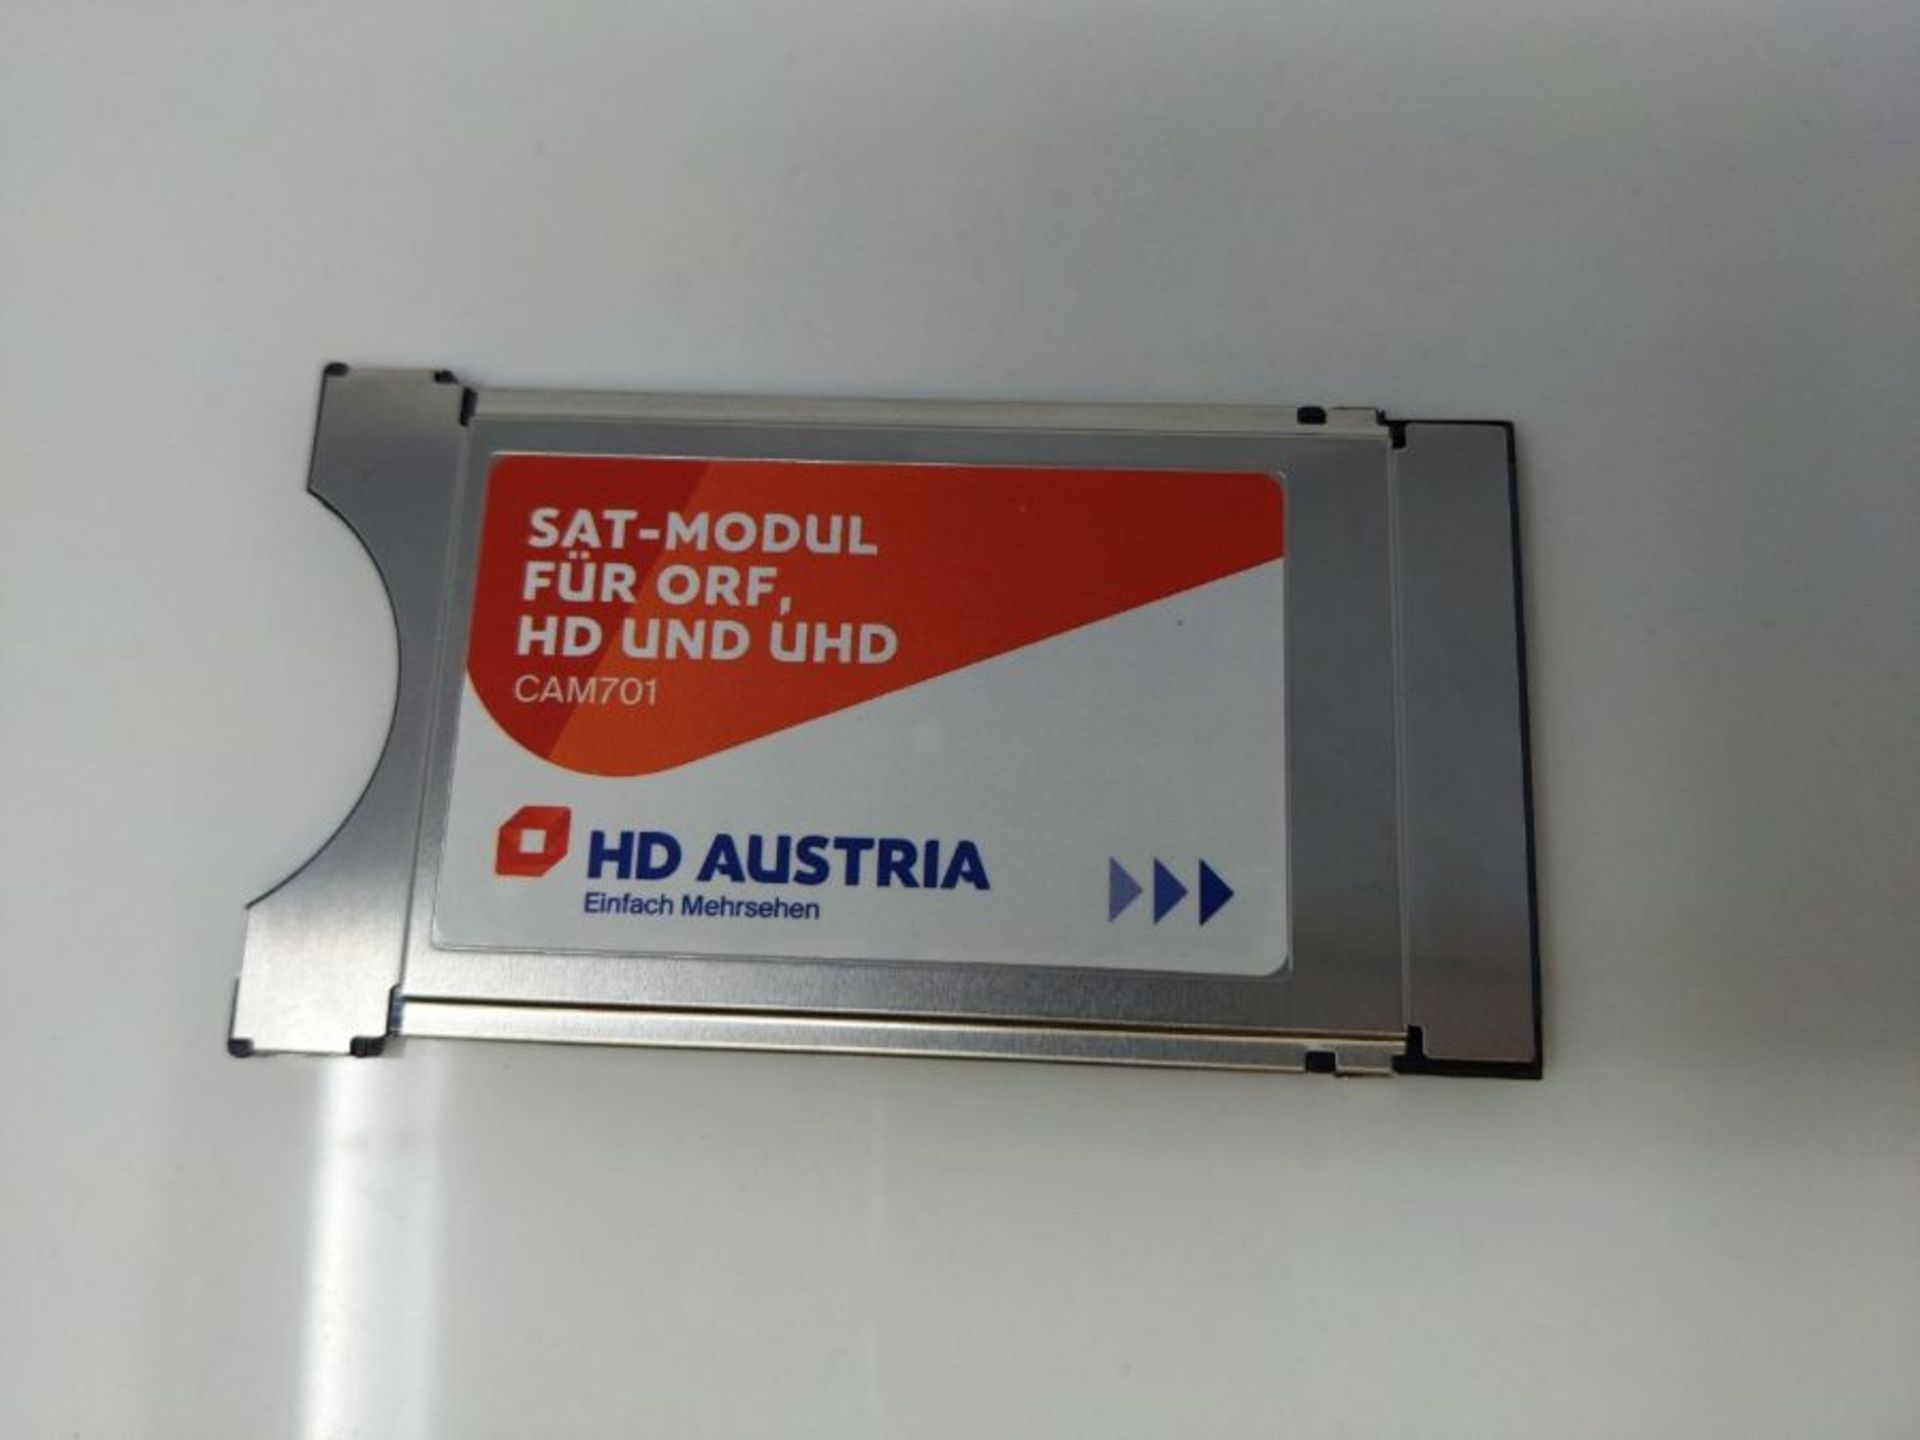 HD Austria SAT module for ORF, HD and UHD - Image 3 of 3